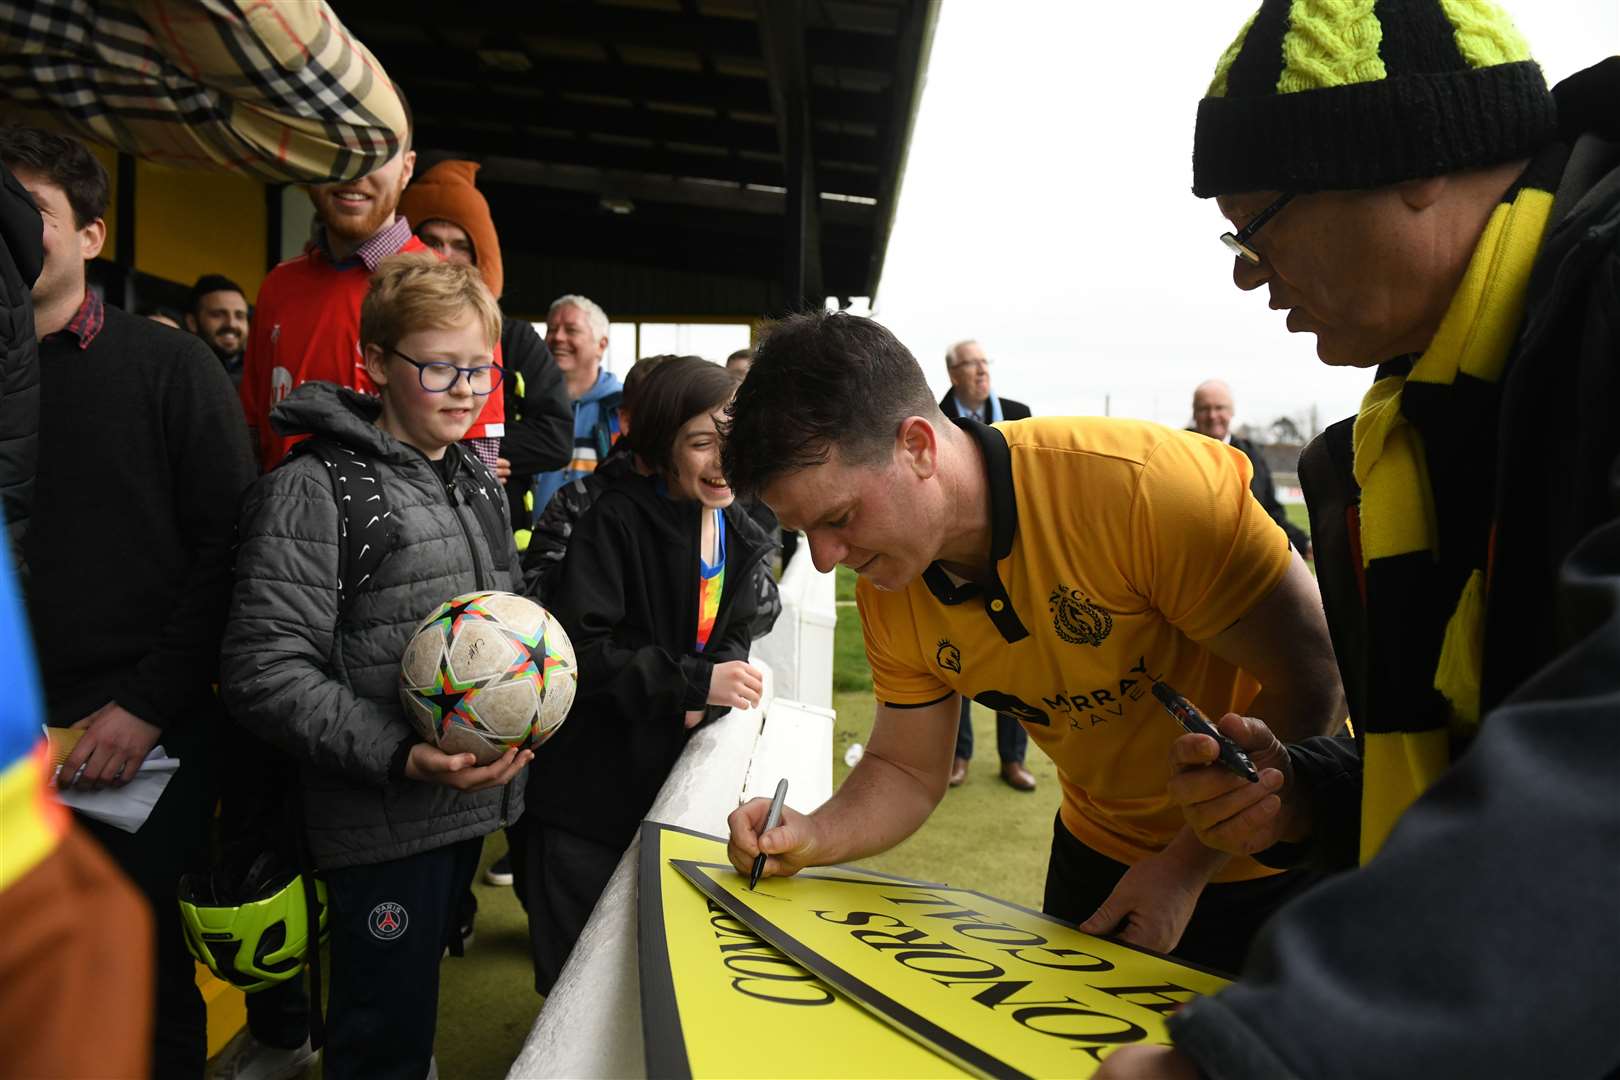 Conor Gethins signs autographs for Nairn fans celebrating his 200 goals. Picture: James Mackenzie